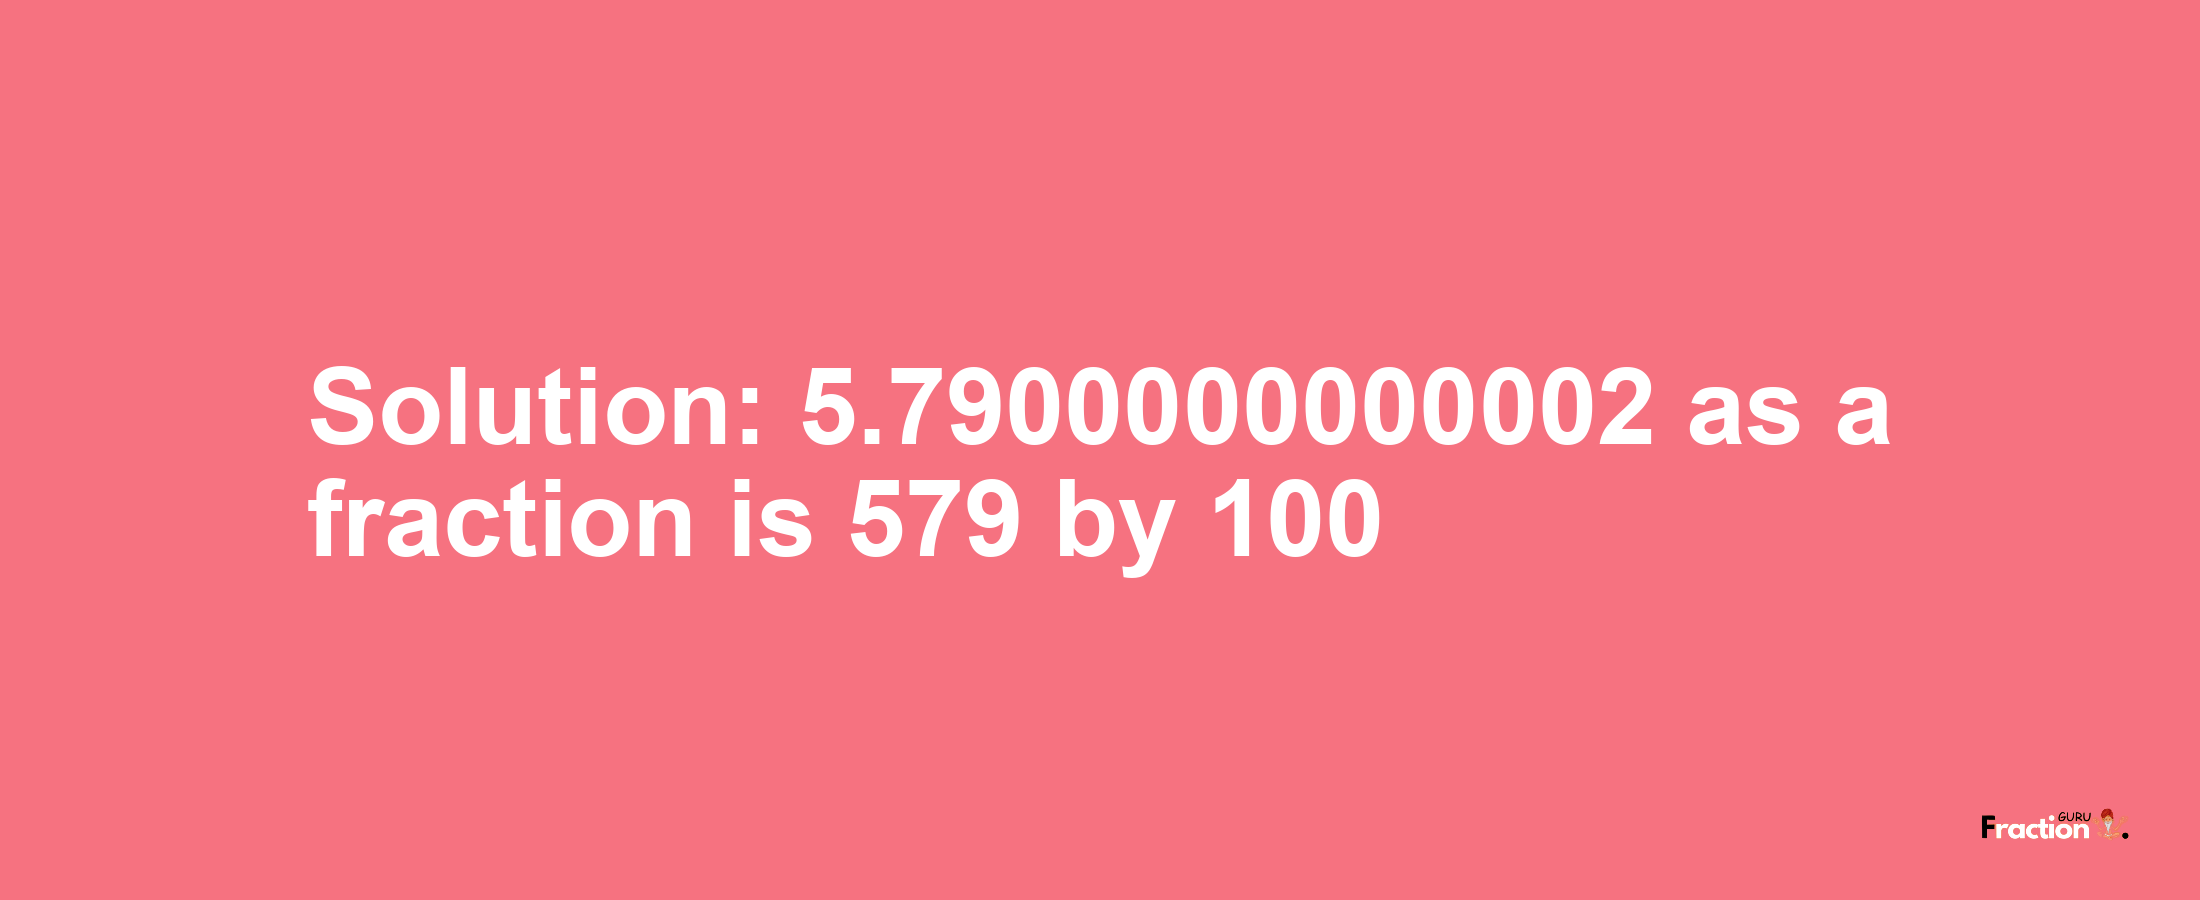 Solution:5.7900000000002 as a fraction is 579/100